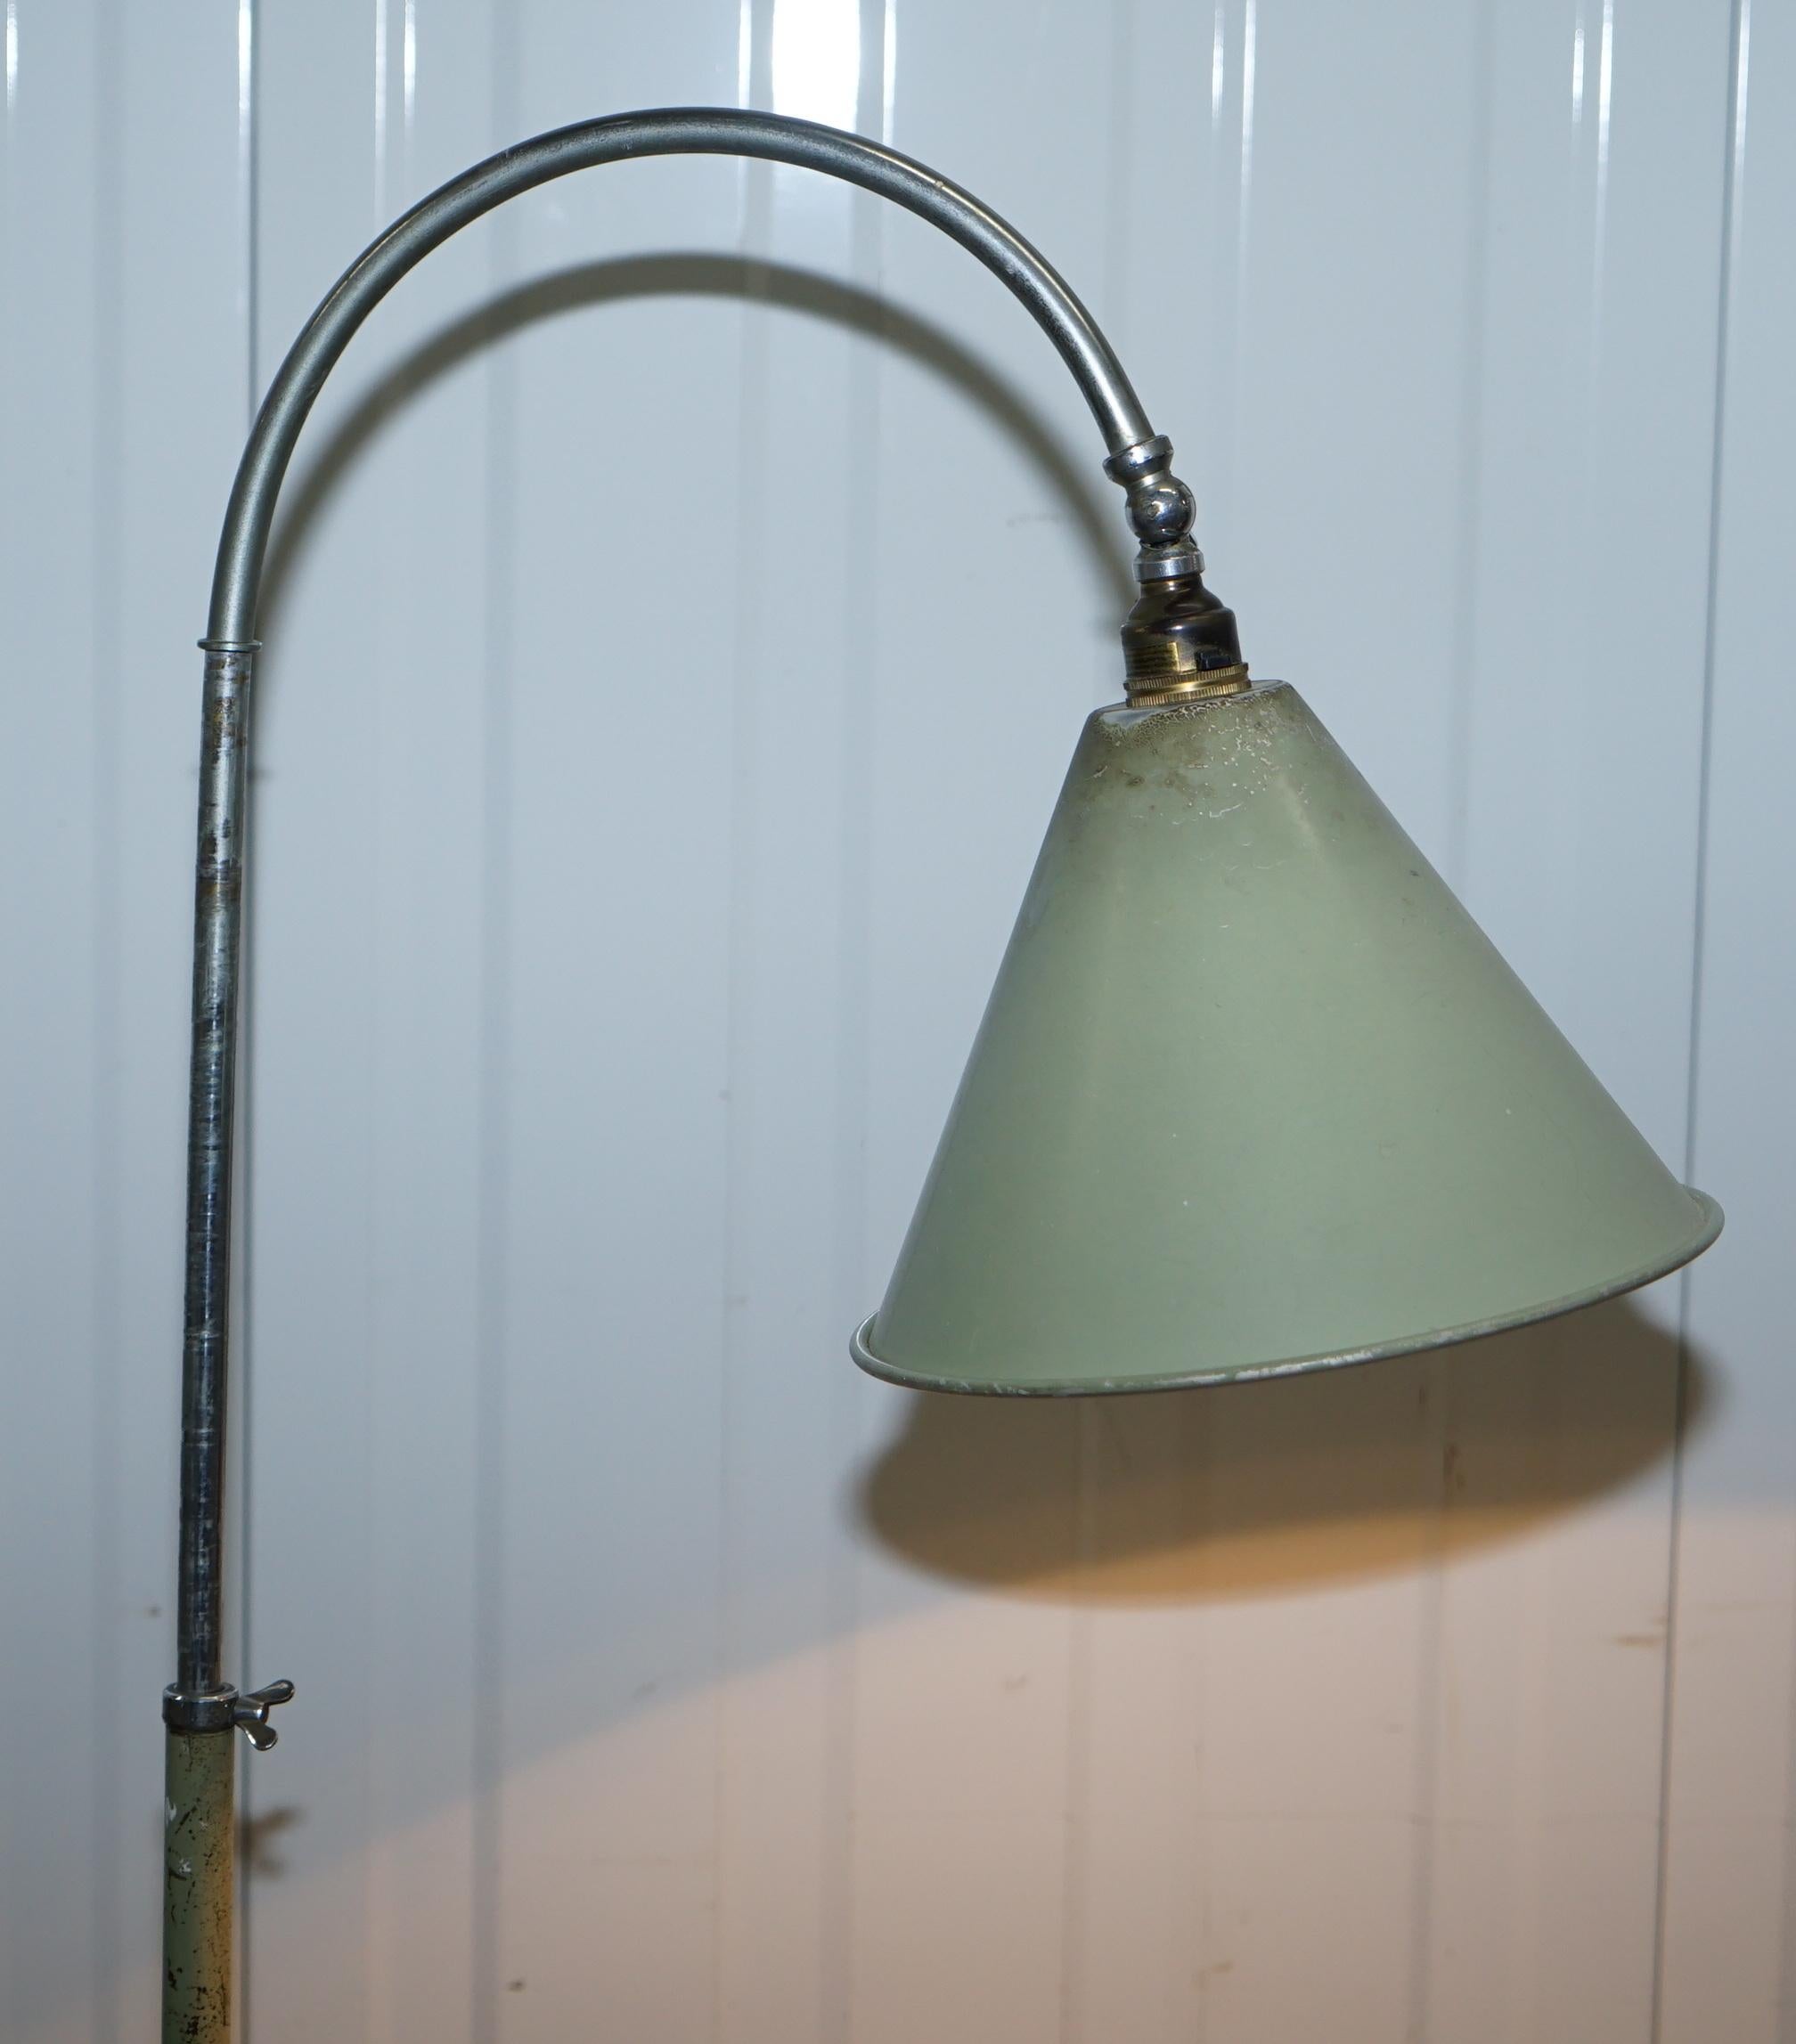 We are delighted to offer for sale this stunning handmade in England solid industrial steel height adjustable lamp with articulated shade

I’m now listing for sale around 20 lamps that all came from the Duke and Duchess of Northumberland’s estate